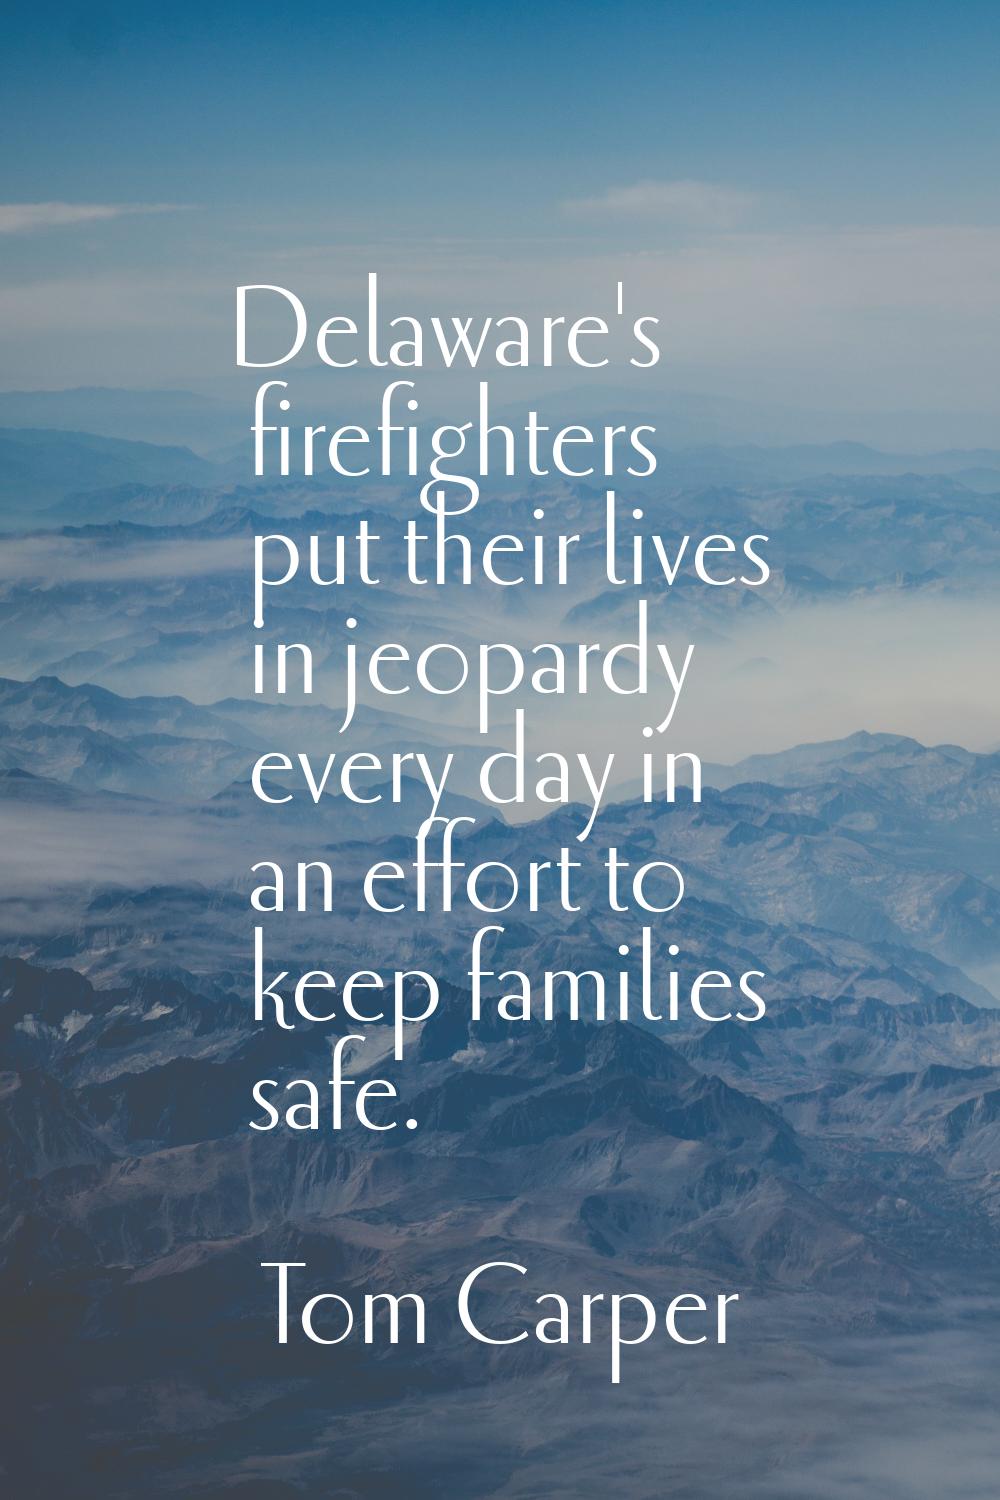 Delaware's firefighters put their lives in jeopardy every day in an effort to keep families safe.